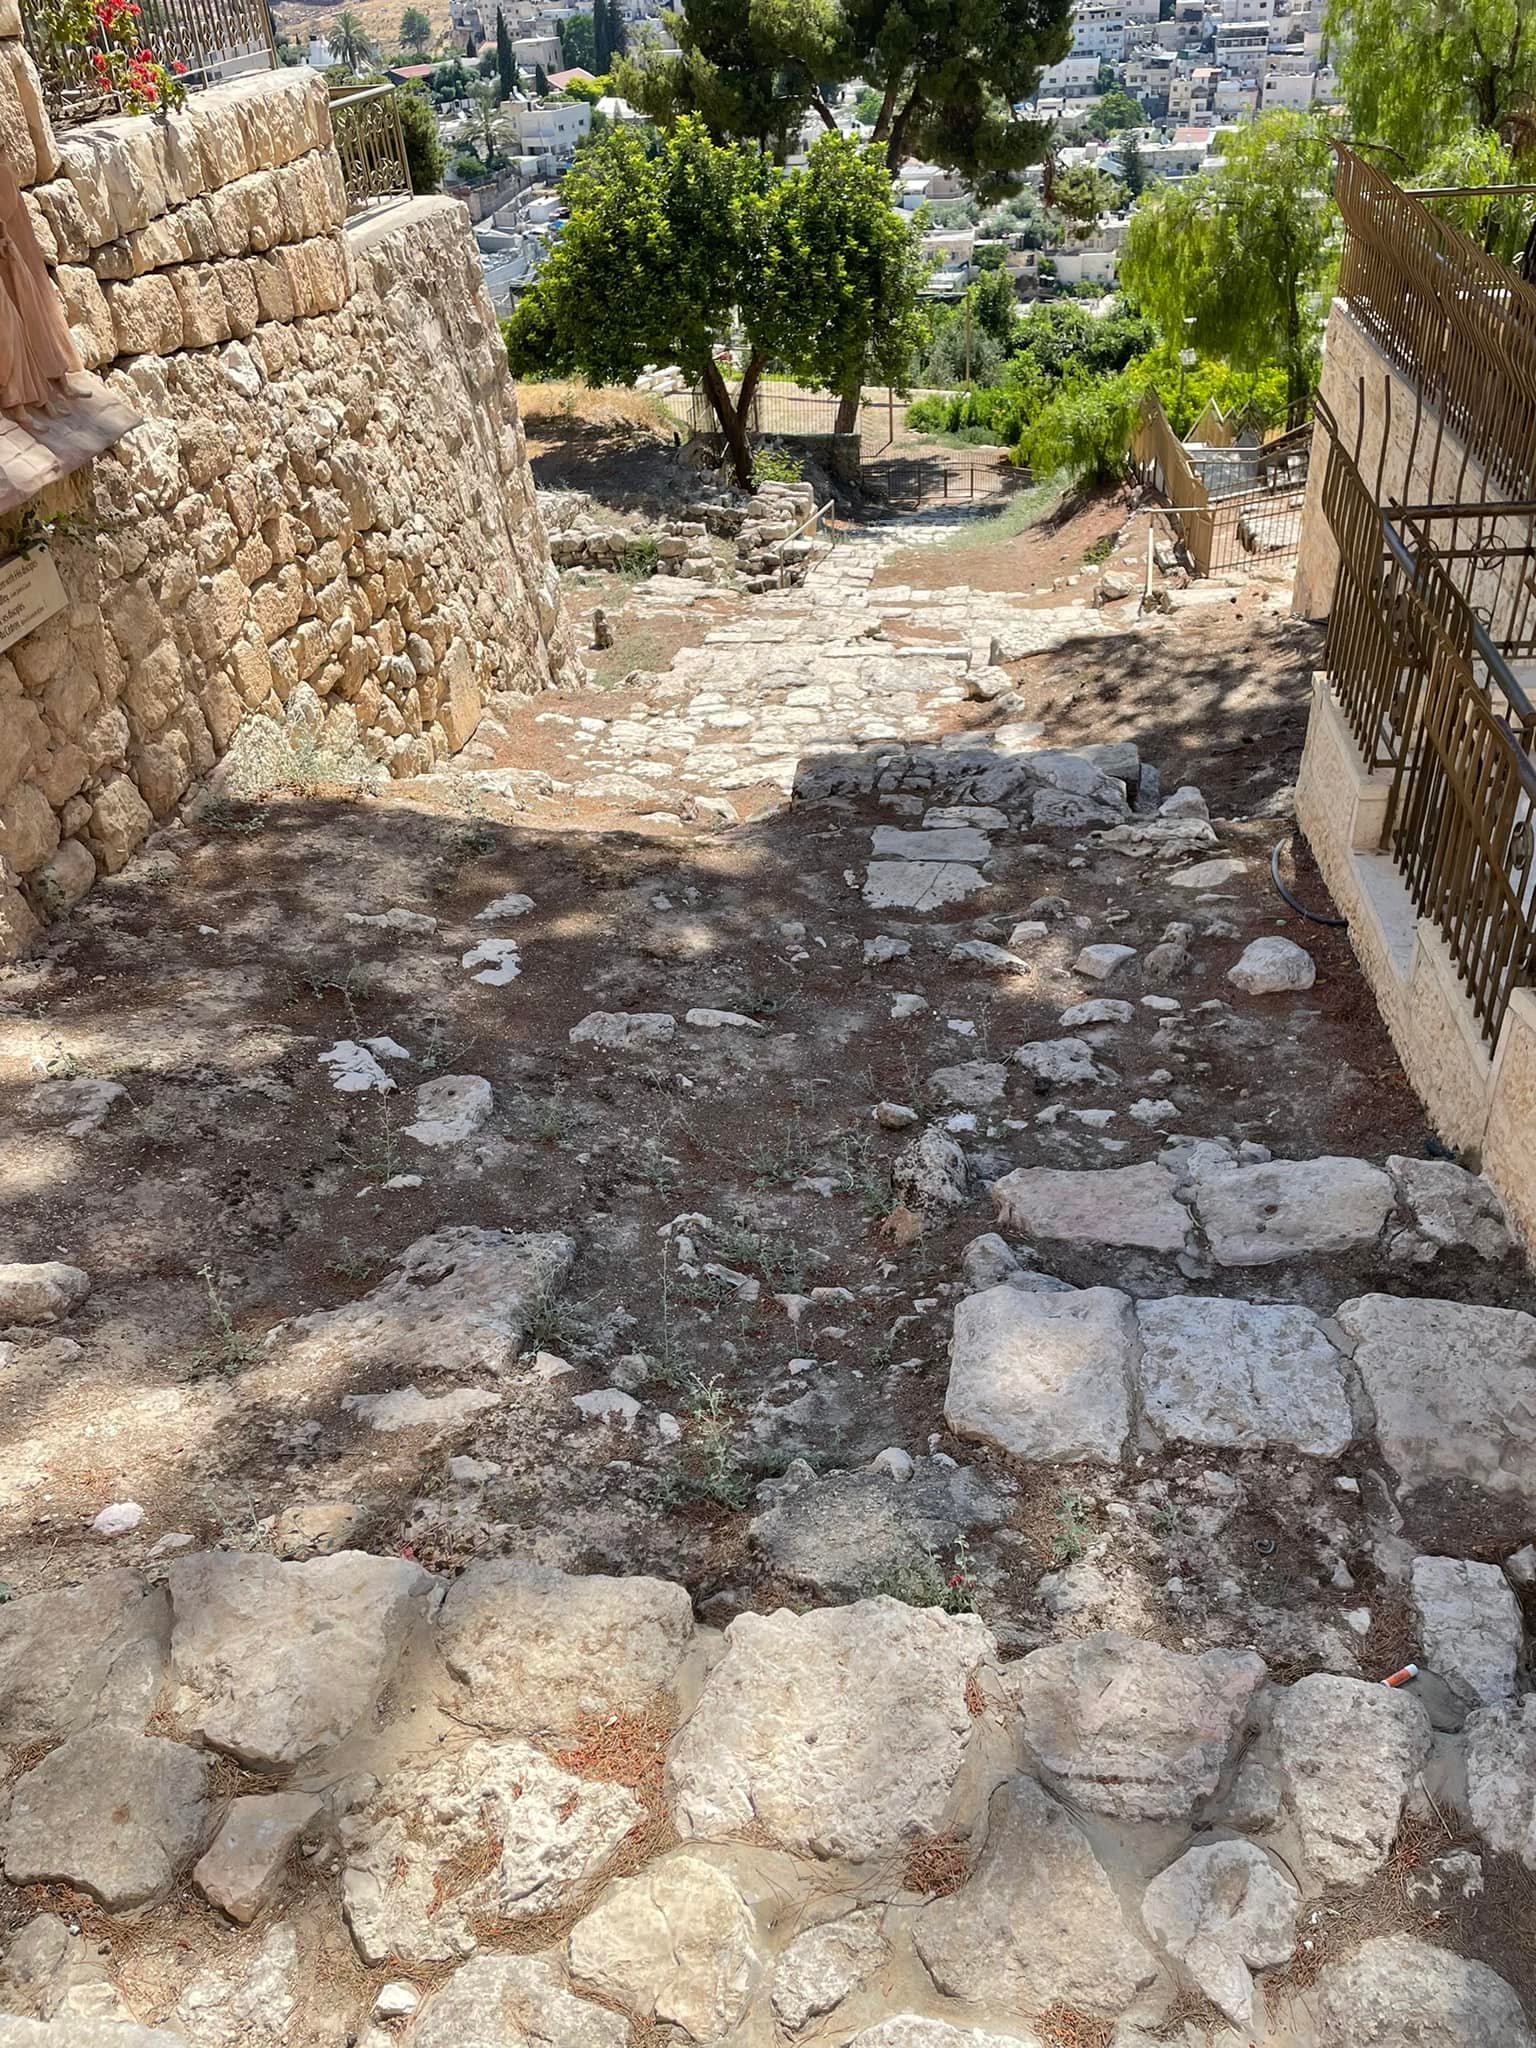  These are the steps that lead up to Caiaphas’s house. Jesus and the apostles walked up them, and we were able to put our feet on them as well. 